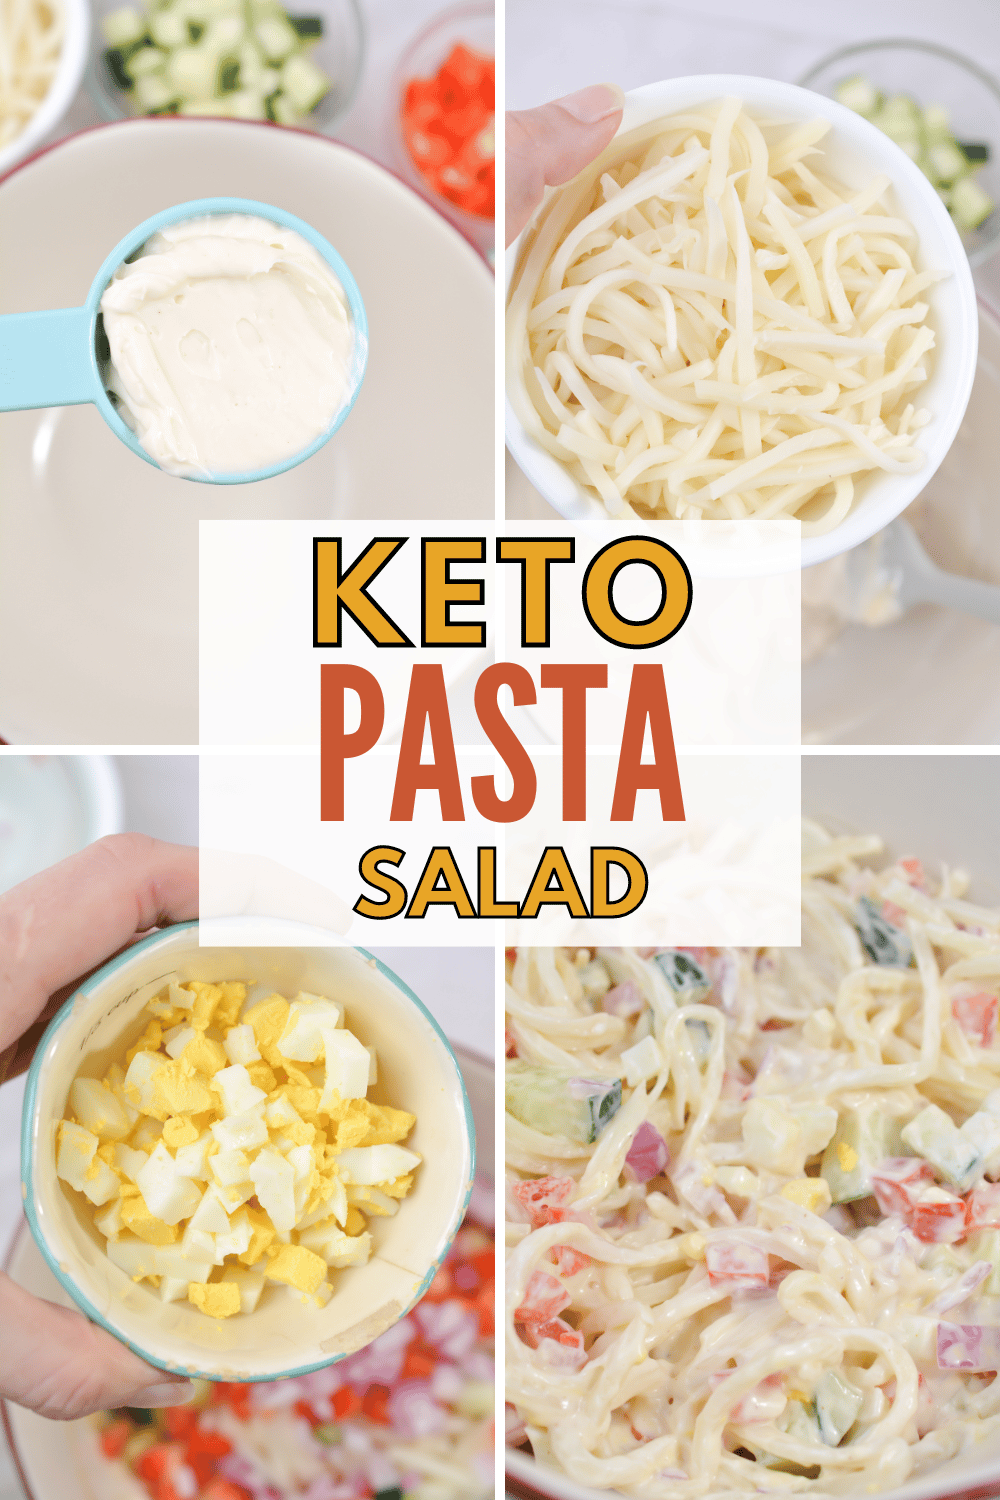 This Keto Pasta Salad recipe is easy to make and is packed with flavor! It’s the perfect side dish to bring to any potluck or summer party! #ketopastasalad #keto #lowcarb #pastasalad via @wondermomwannab